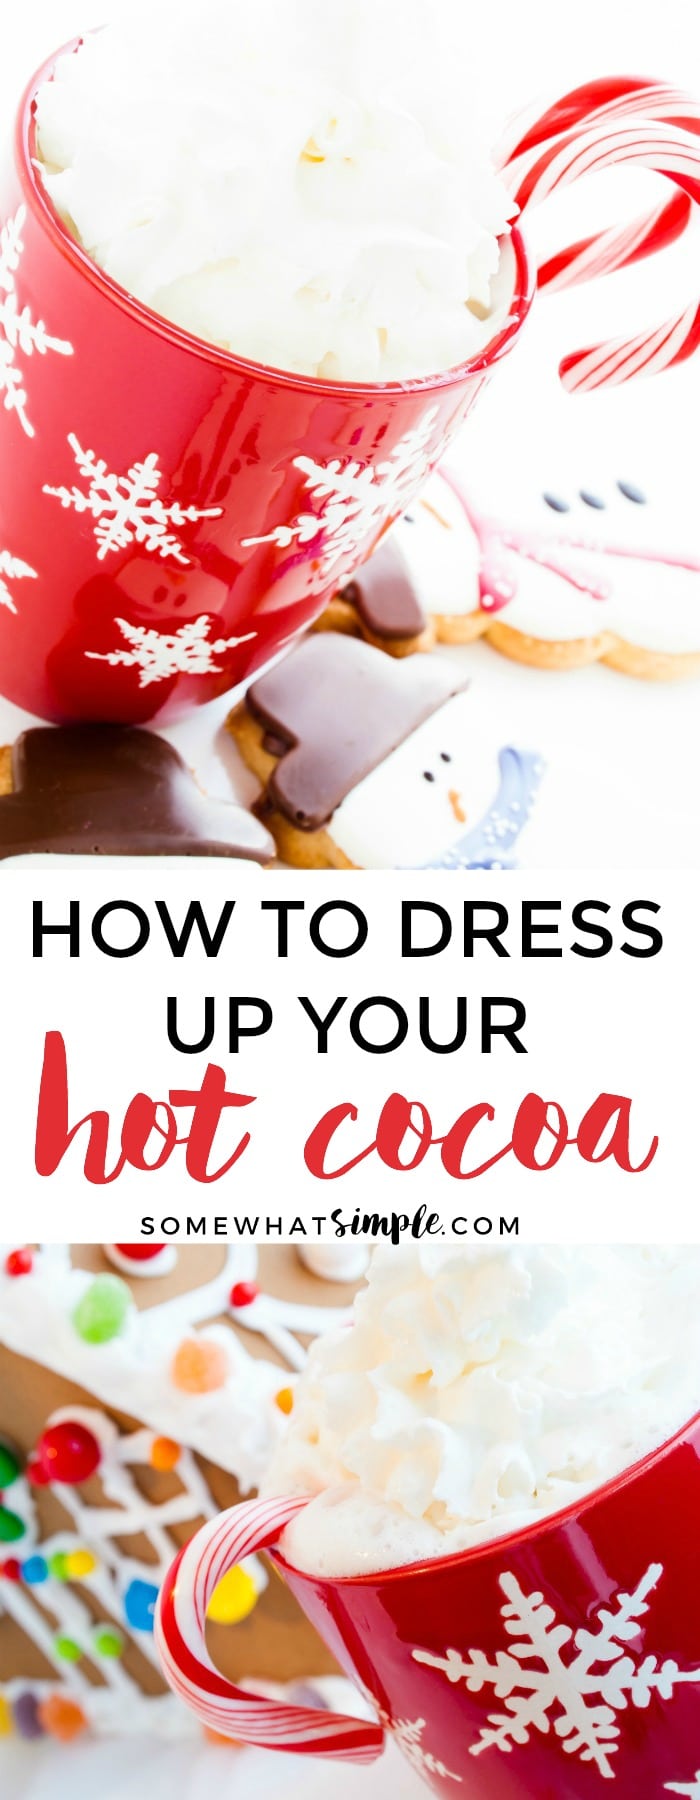 10 Ways to Dress Up Hot Chocolate Packets via @somewhatsimple